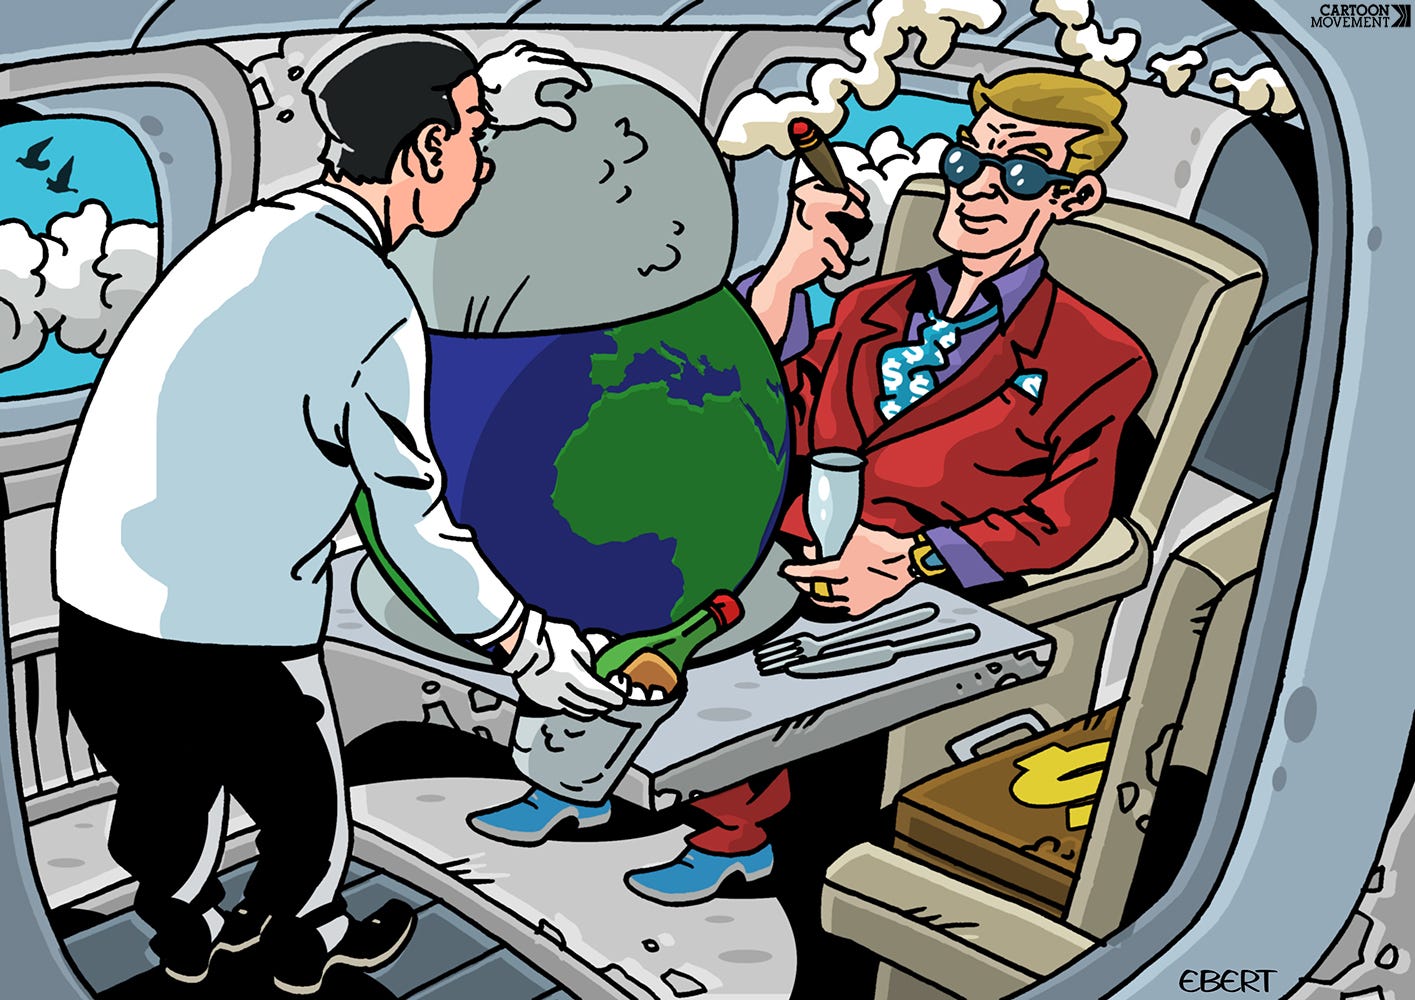 Cartoon that shows us the inside of a private jet, where we see a rich men who is about to be served dinner. As a waiter lifts the cloth, it is revealed the the dish is in fact the planet earth.